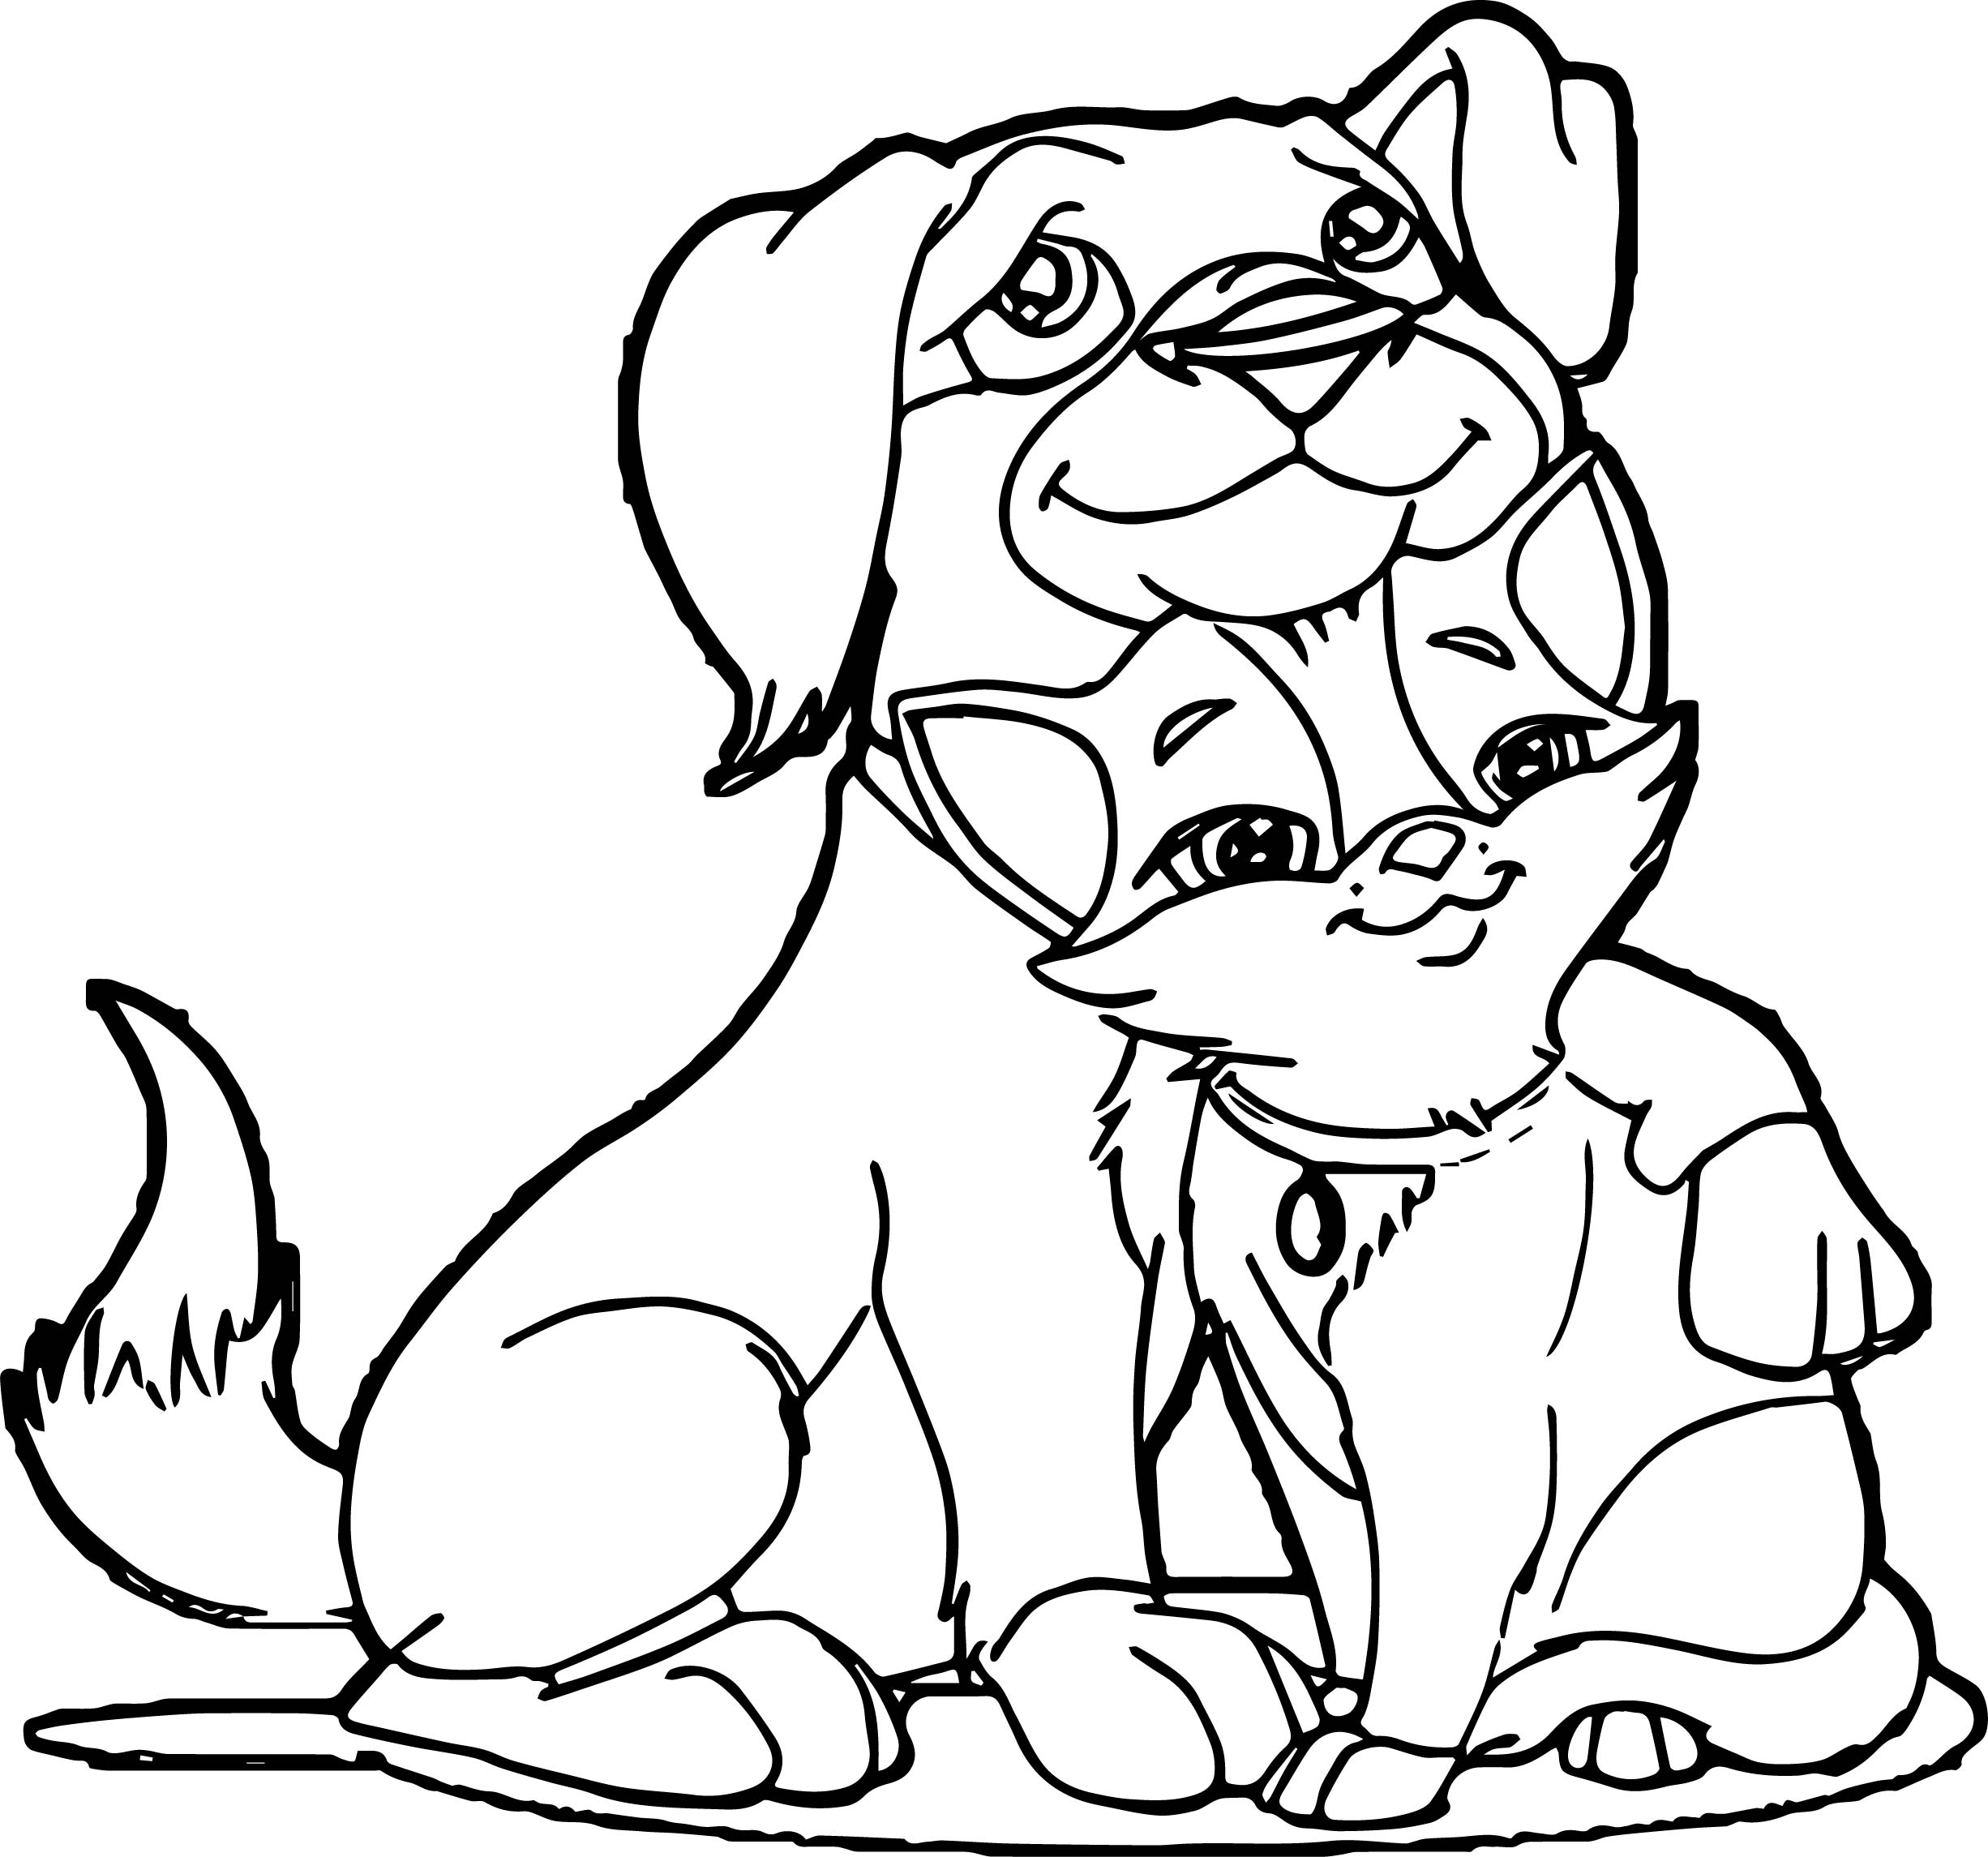 Dog And Cat Friends Coloring Pages Wecoloringpagecom